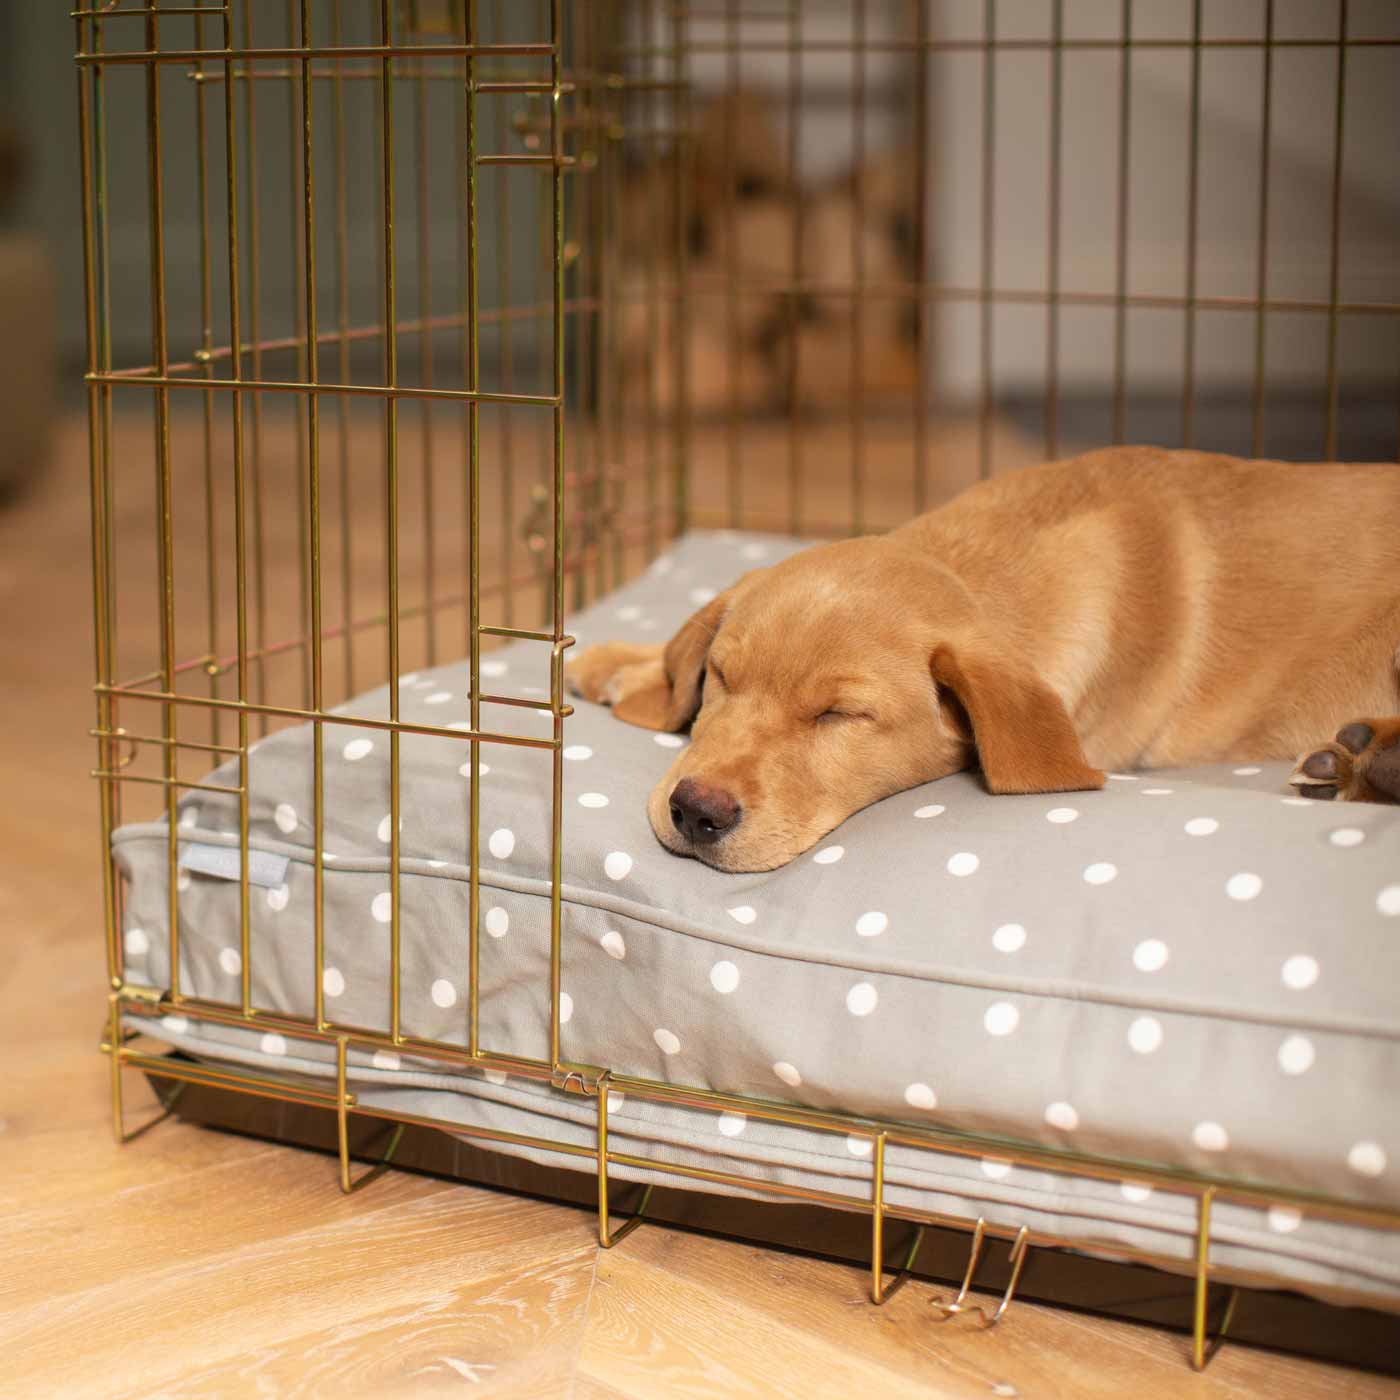 Discover Our Heavy-Duty Dog Crate With Spots & Stripes Grey Spot Cushion! The Perfect Crate Accessories. Available To Personalise Here at Lords & Labradors